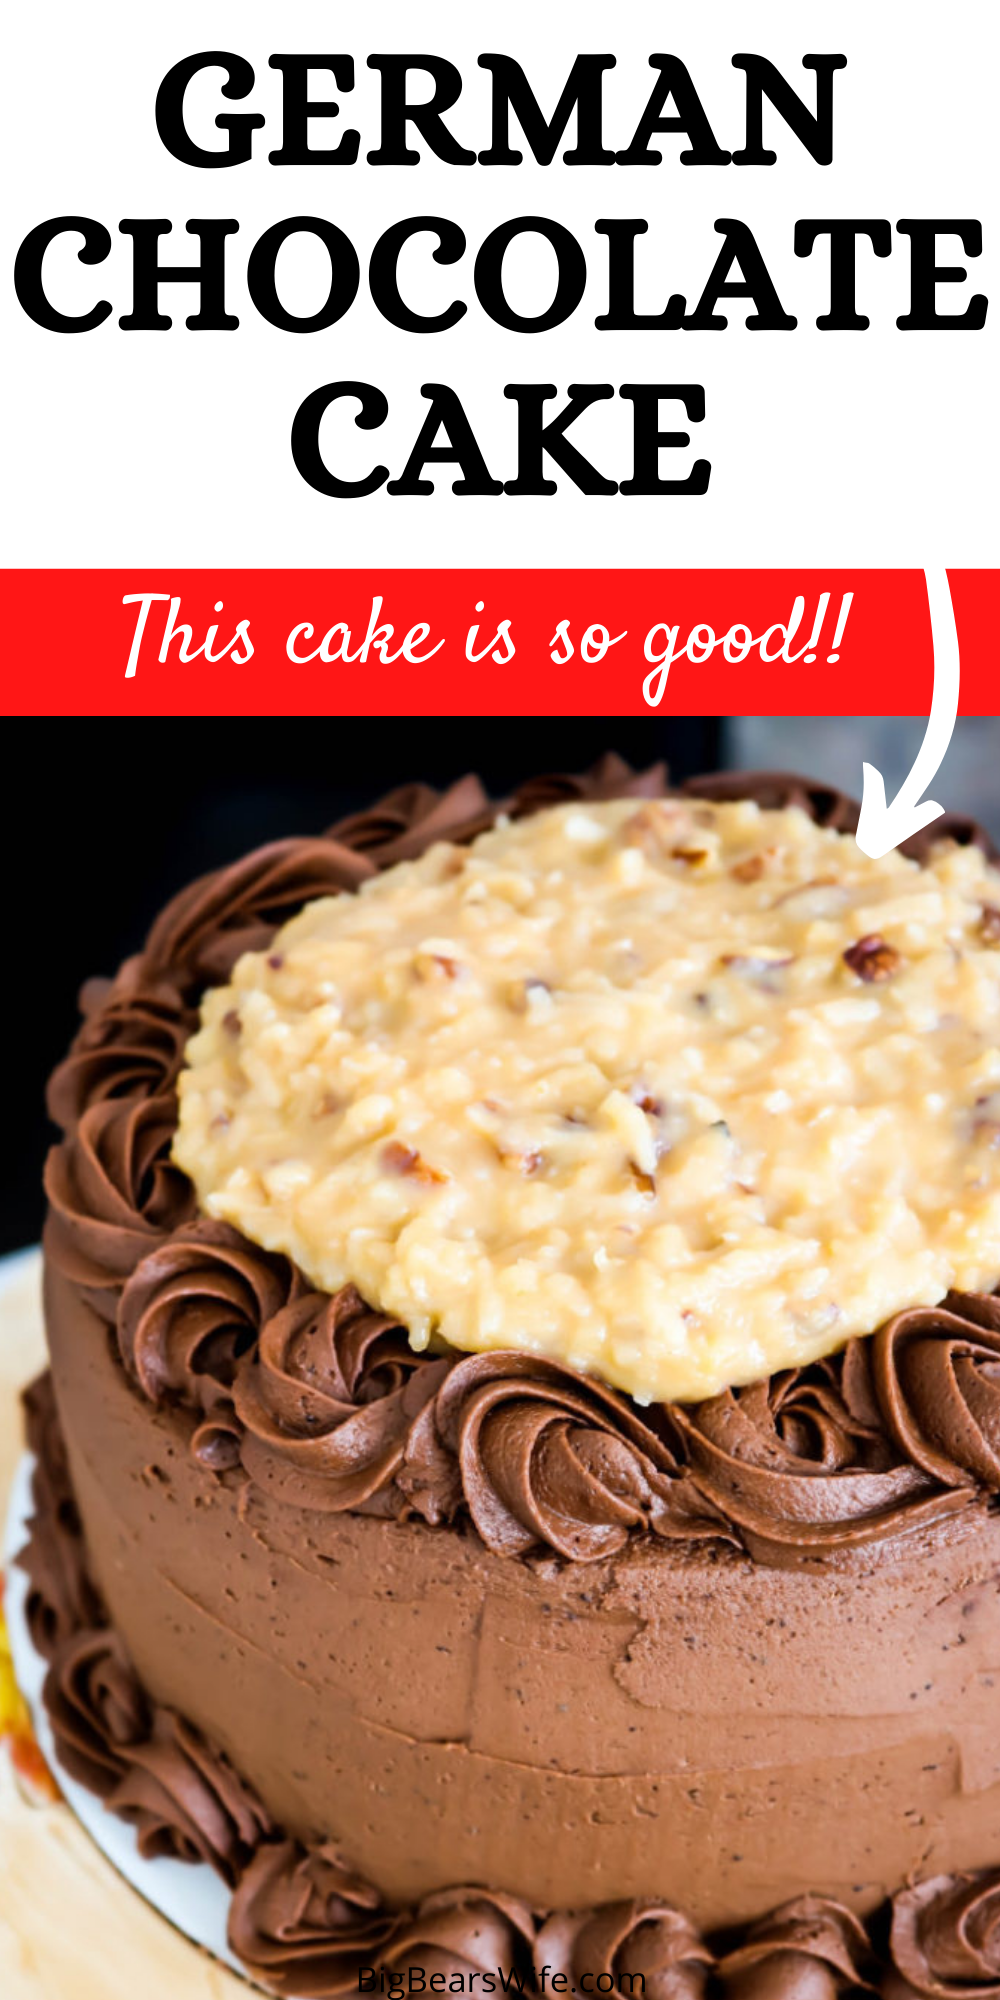 This German Chocolate Cake has three layers of amazing homemade chocolate cake, frosted with a homemade chocolate frosting and topped with a delicious pecan coconut filling! via @bigbearswife